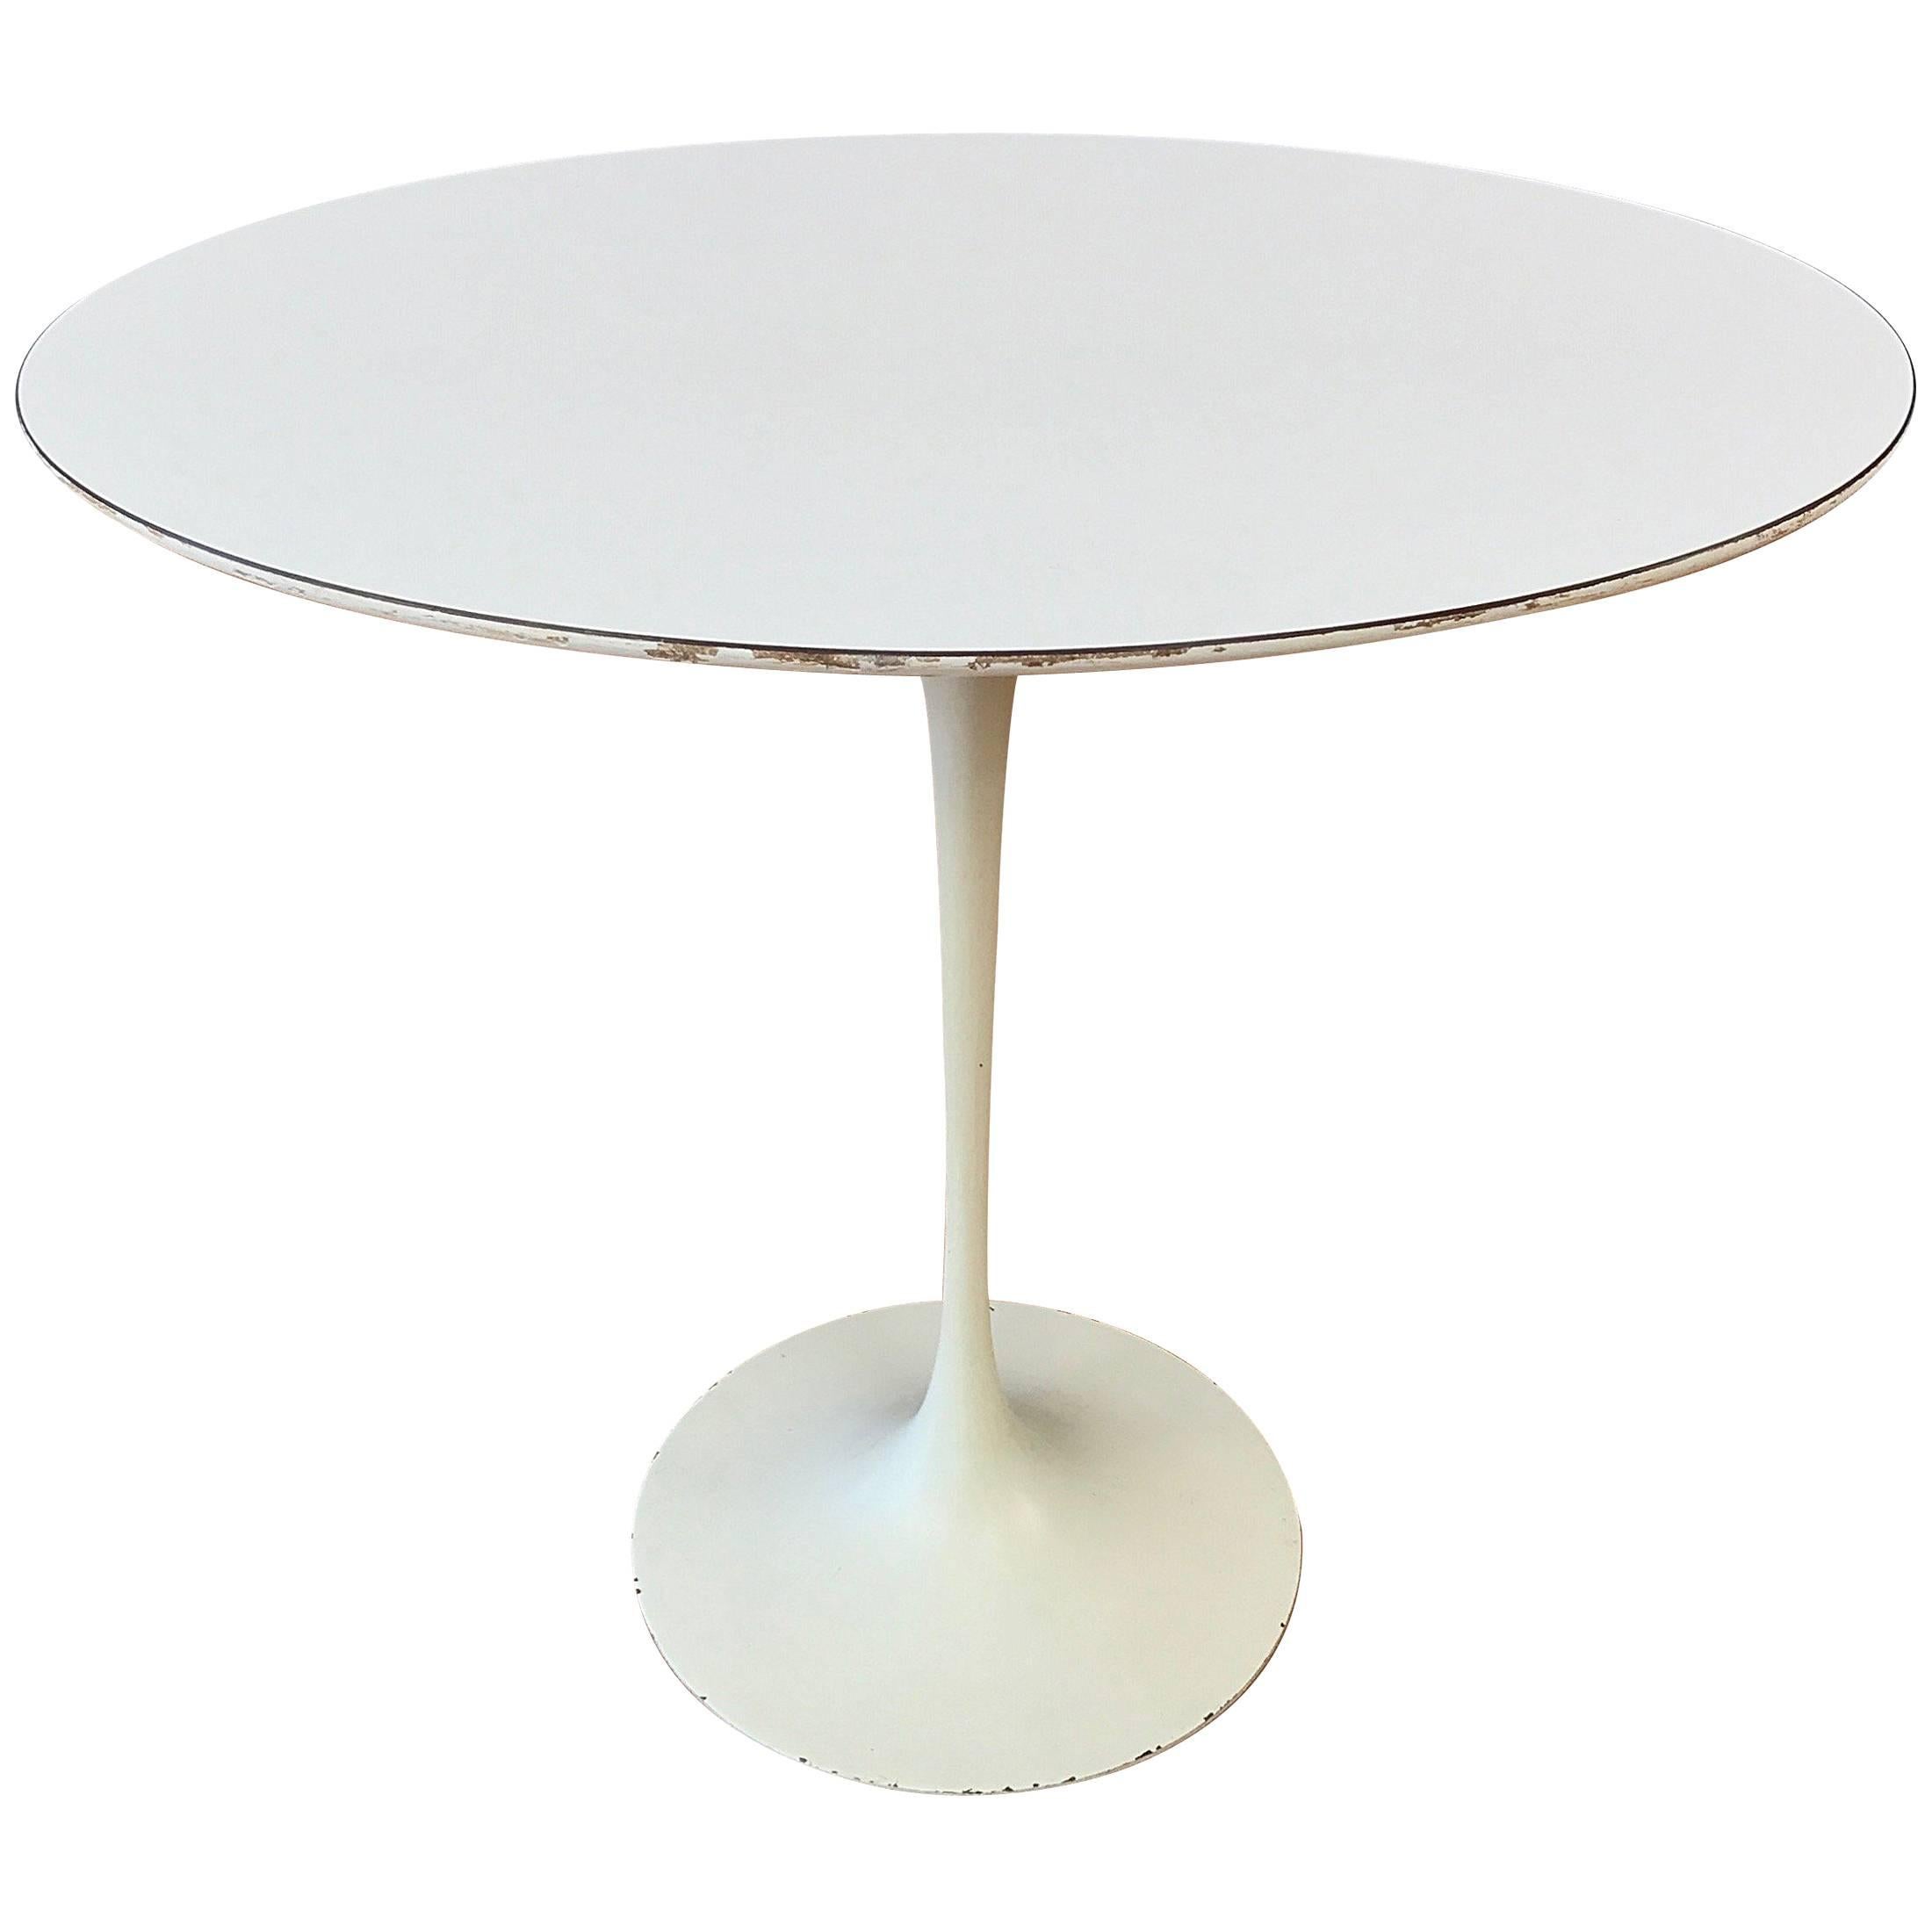 Early Eero Saarinen for Knoll Pedestal Collection Oval Side Table